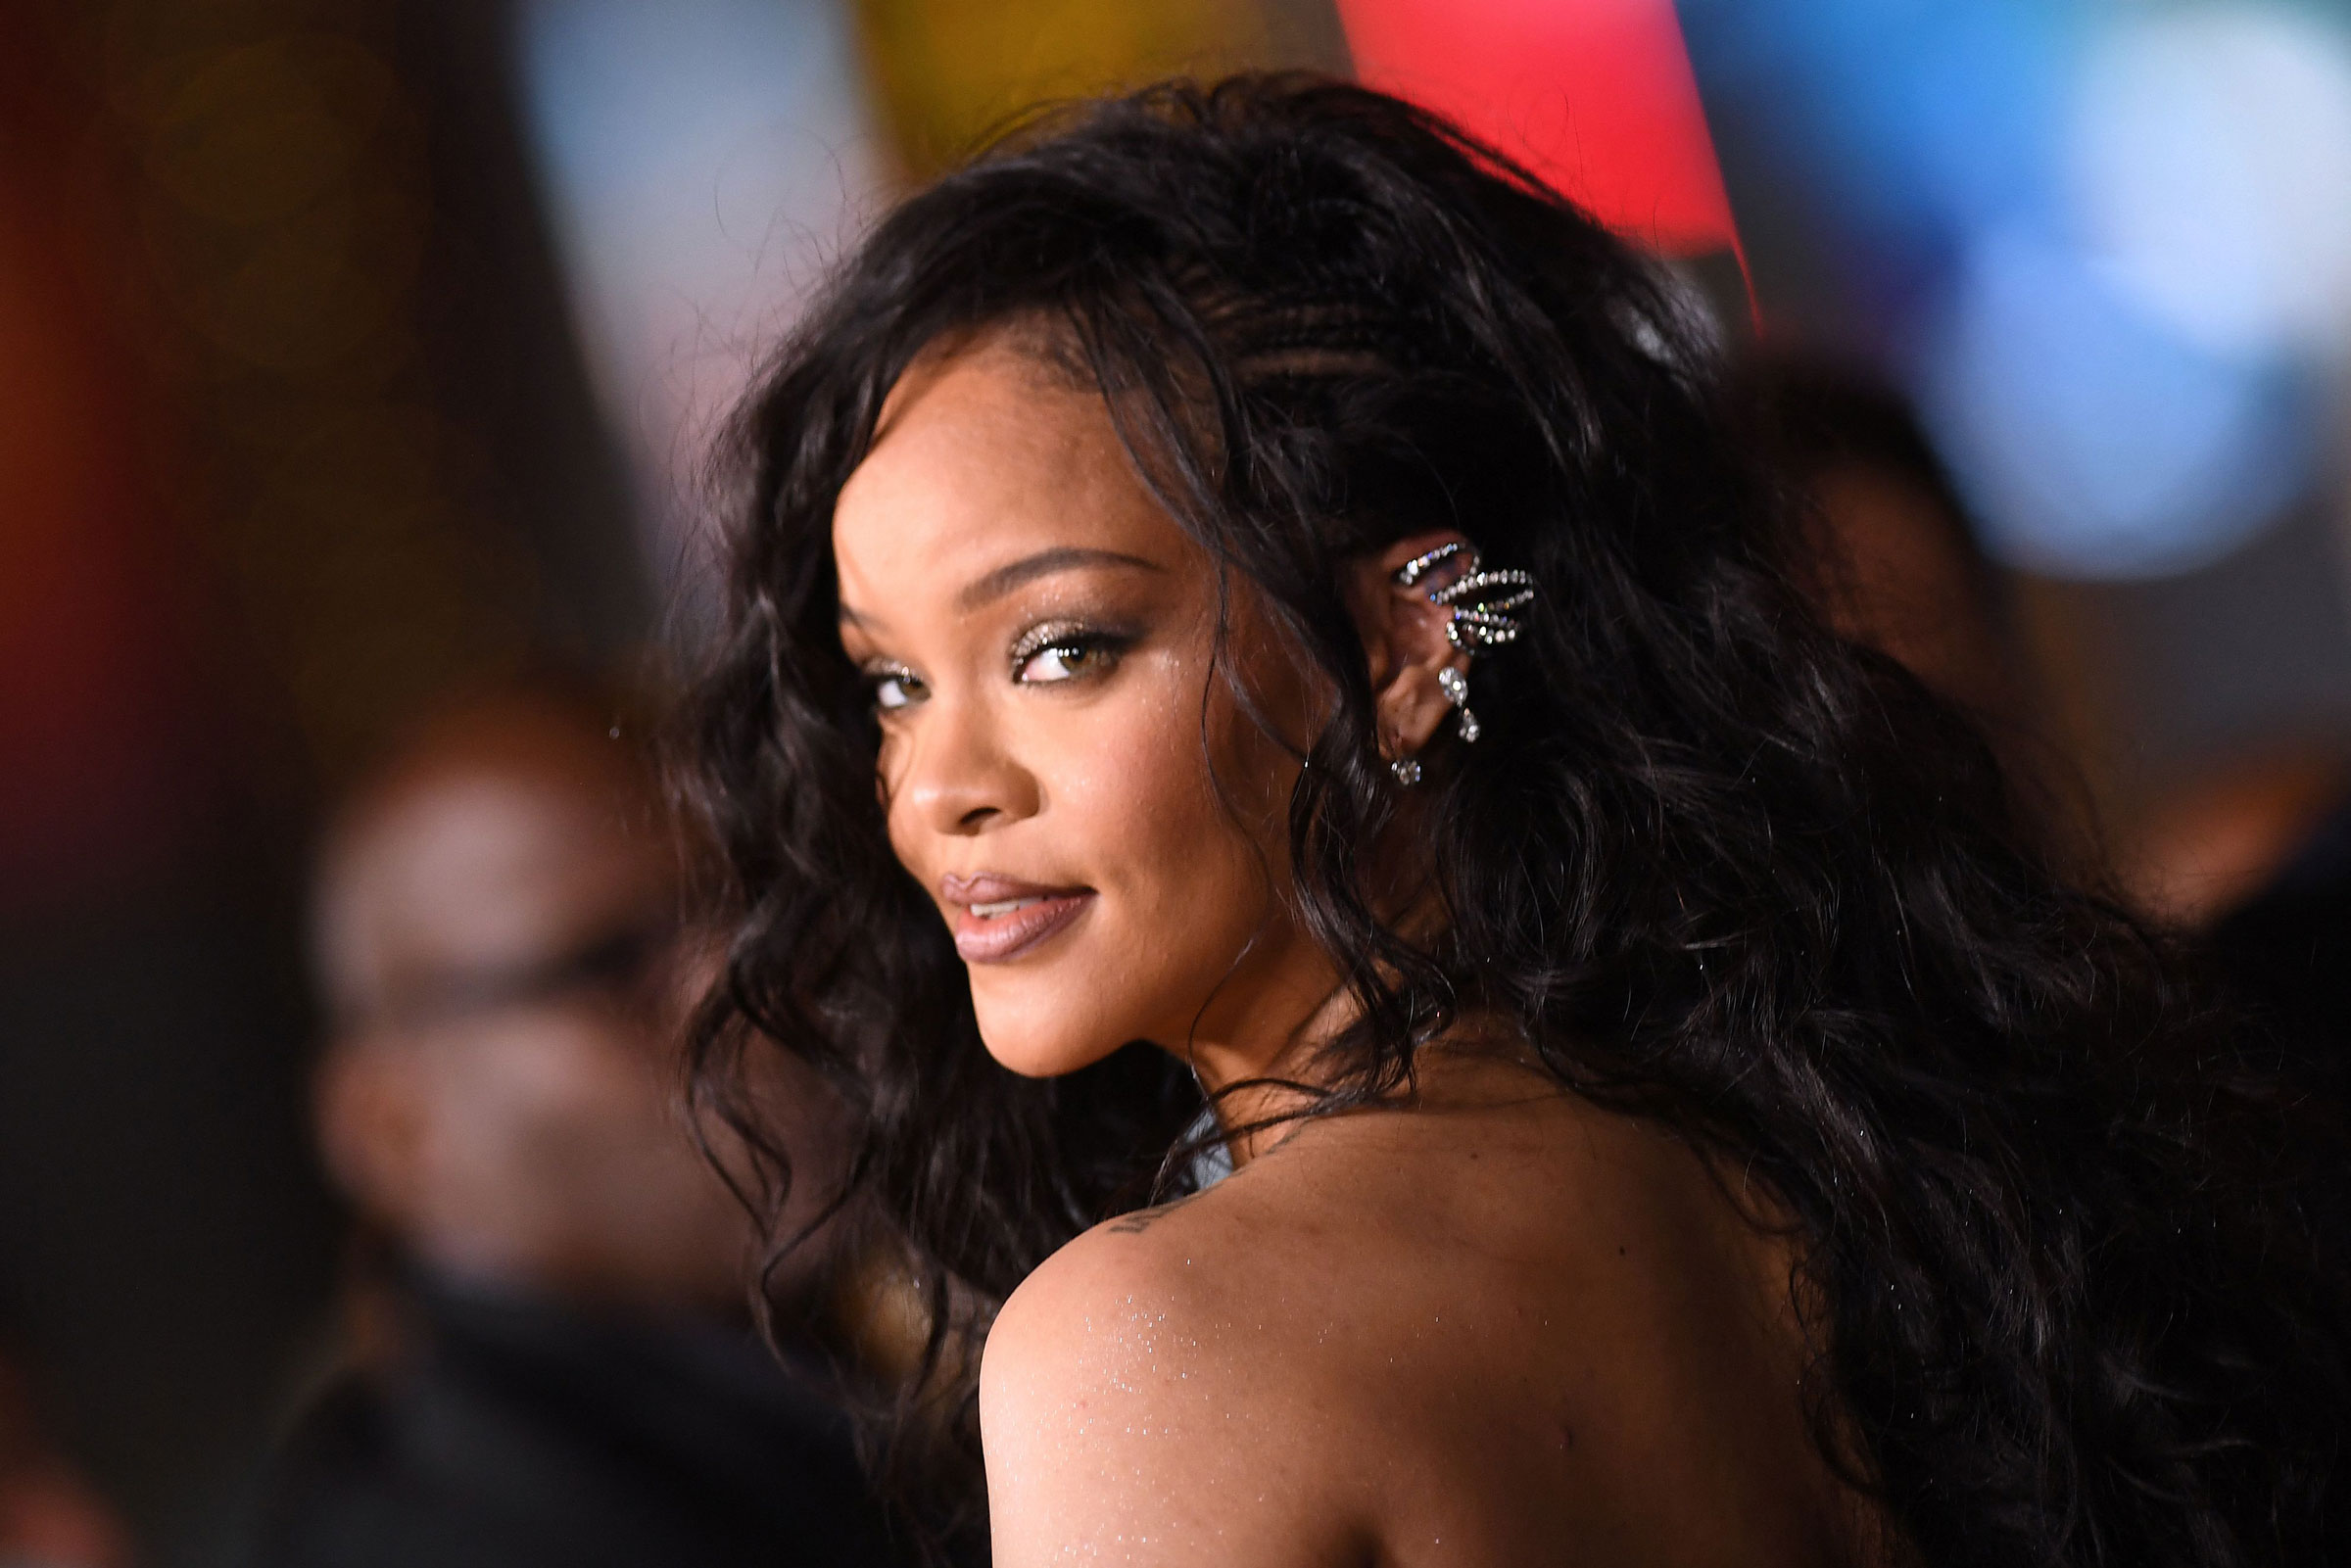 Barbadian singer Rihanna arrives for the world premiere of Marvel Studios’ “Black Panther: Wakanda Forever” at the Dolby Theatre in Hollywood, Calif., on Oct, 26, 2022. (Valerie Macon—AFP/Getty Images)